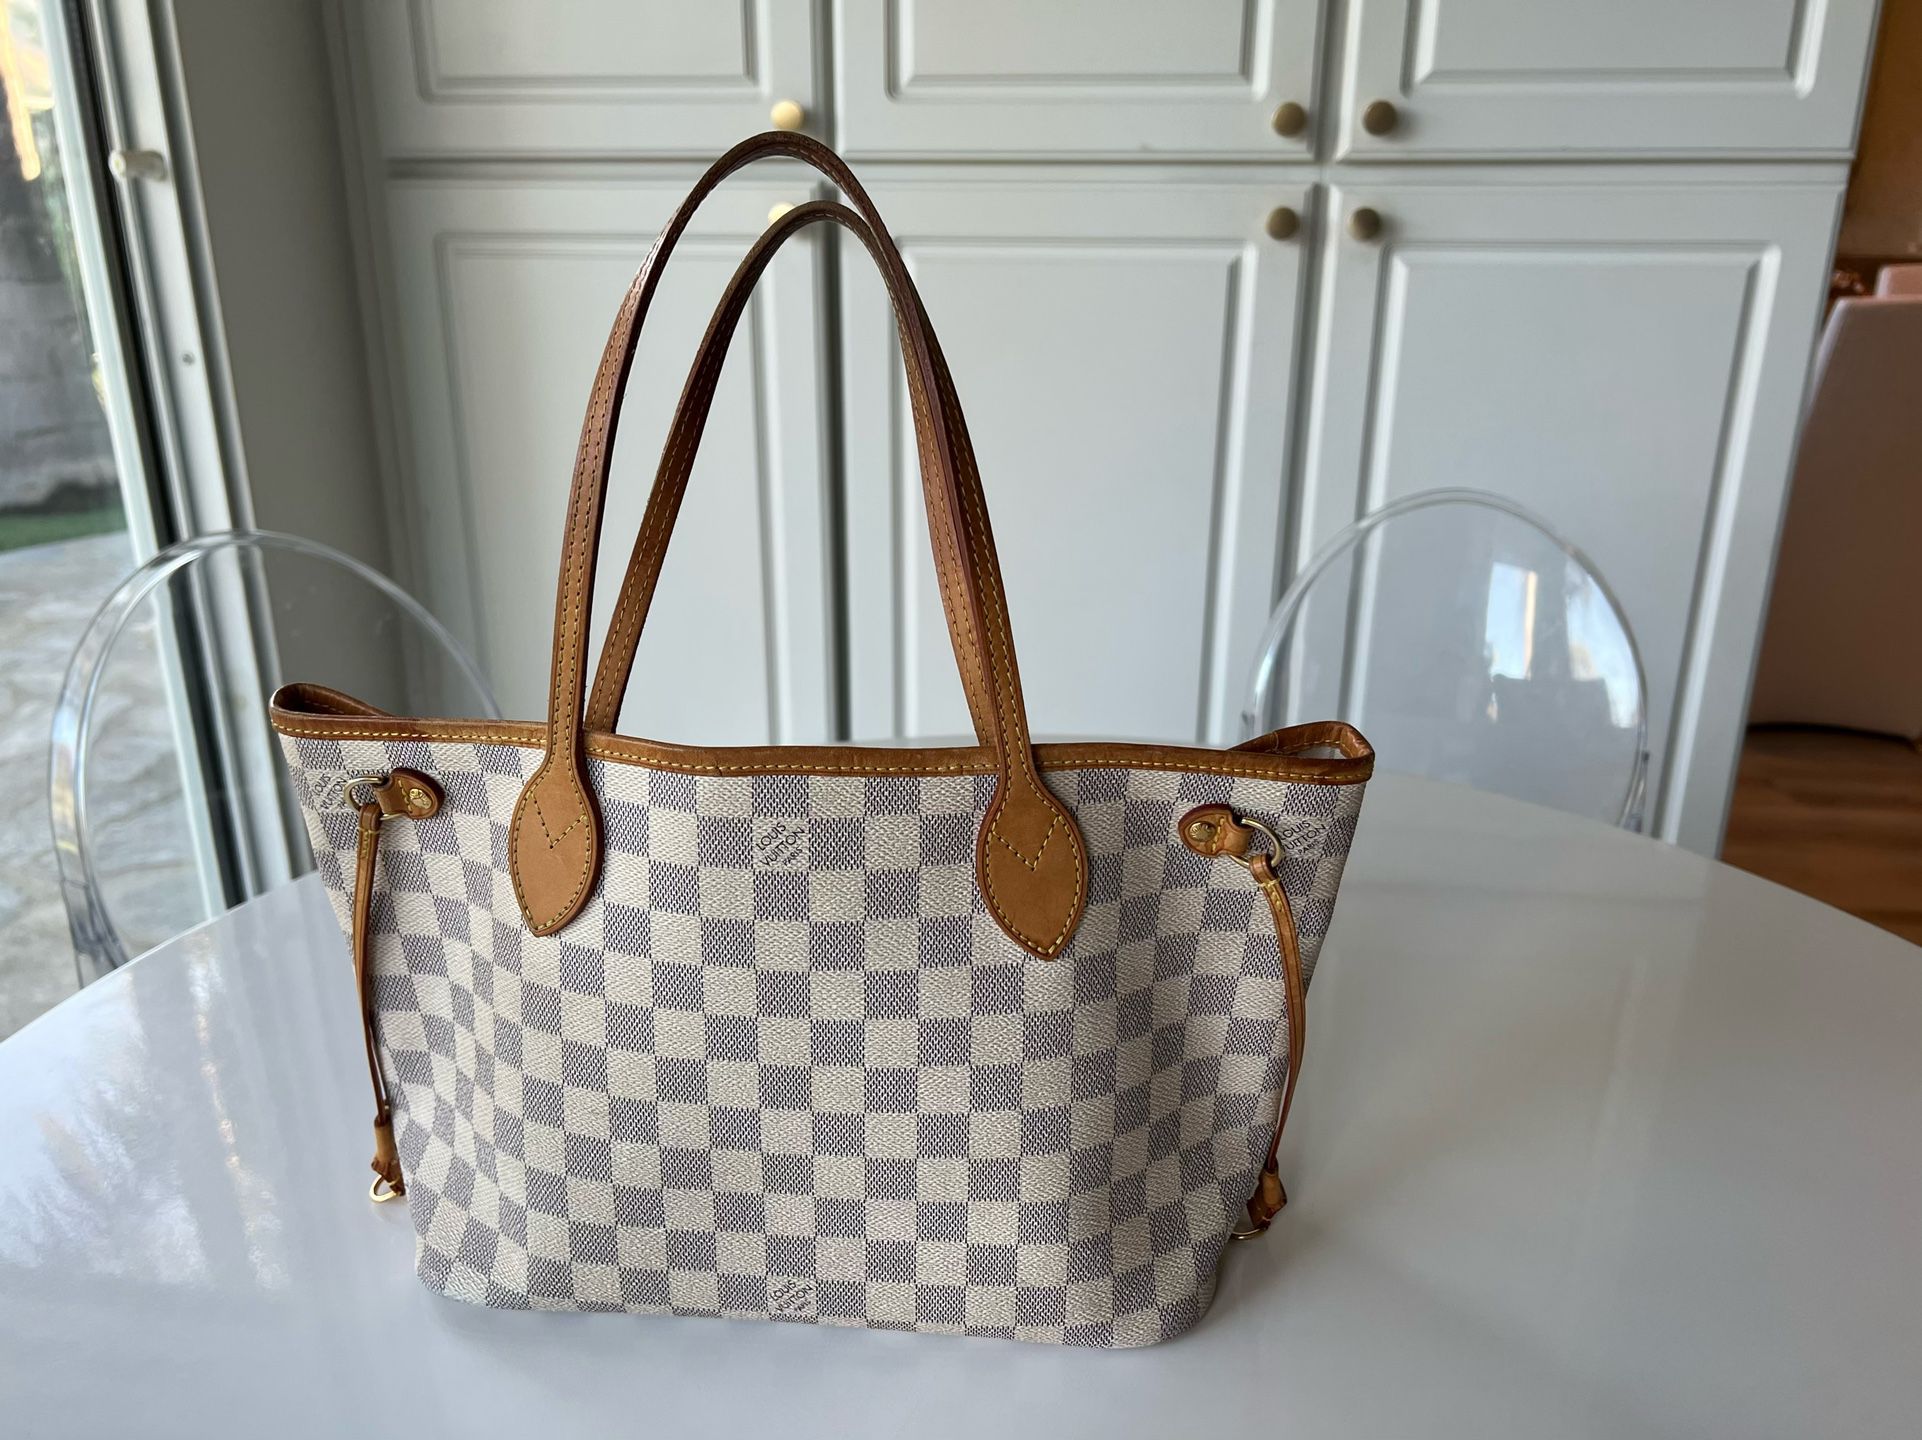 Lois Vuitton Neverfull Damier Azur PM , Authentic with Tags and storage bag  for Sale in Westlake Village, CA - OfferUp